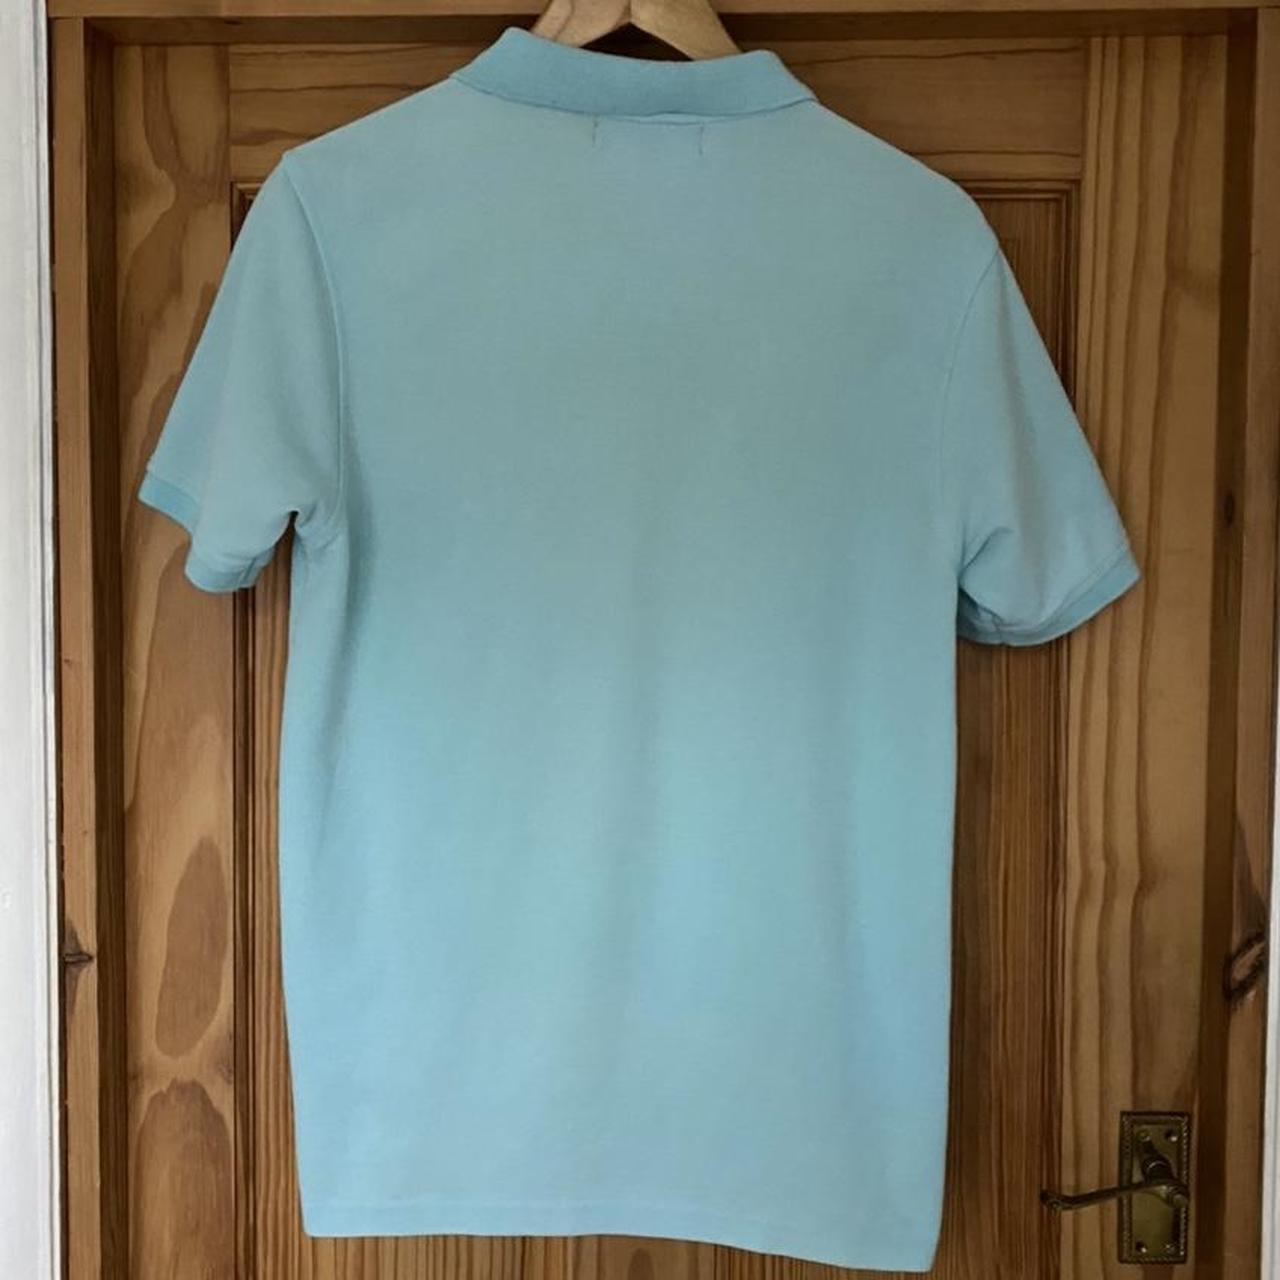 Men's Green and Blue Polo-shirts | Depop